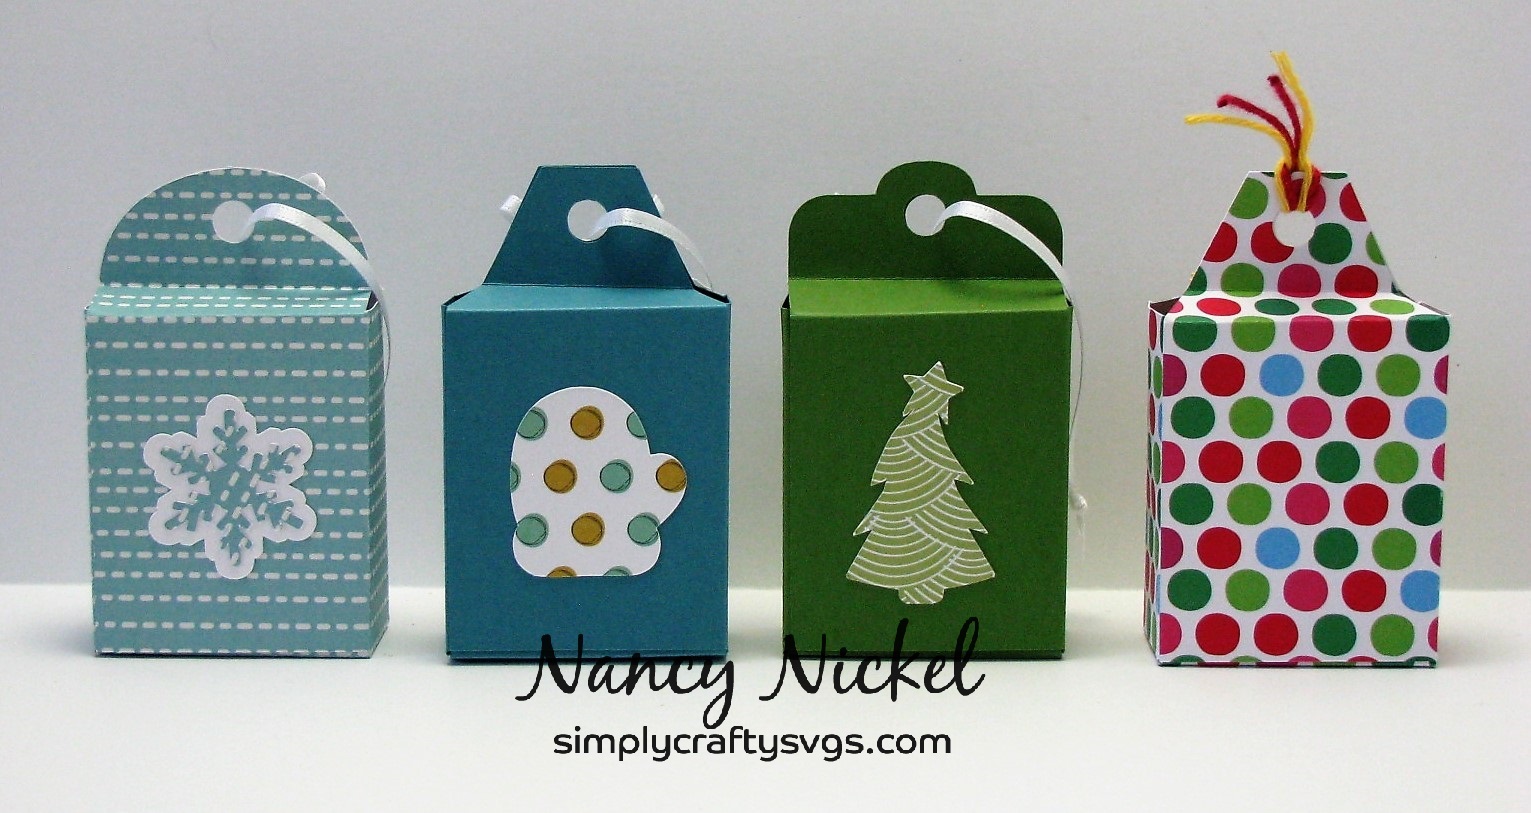 The Nickel Nook: Simply Crafty SVGs - Christmas Tag Box Set